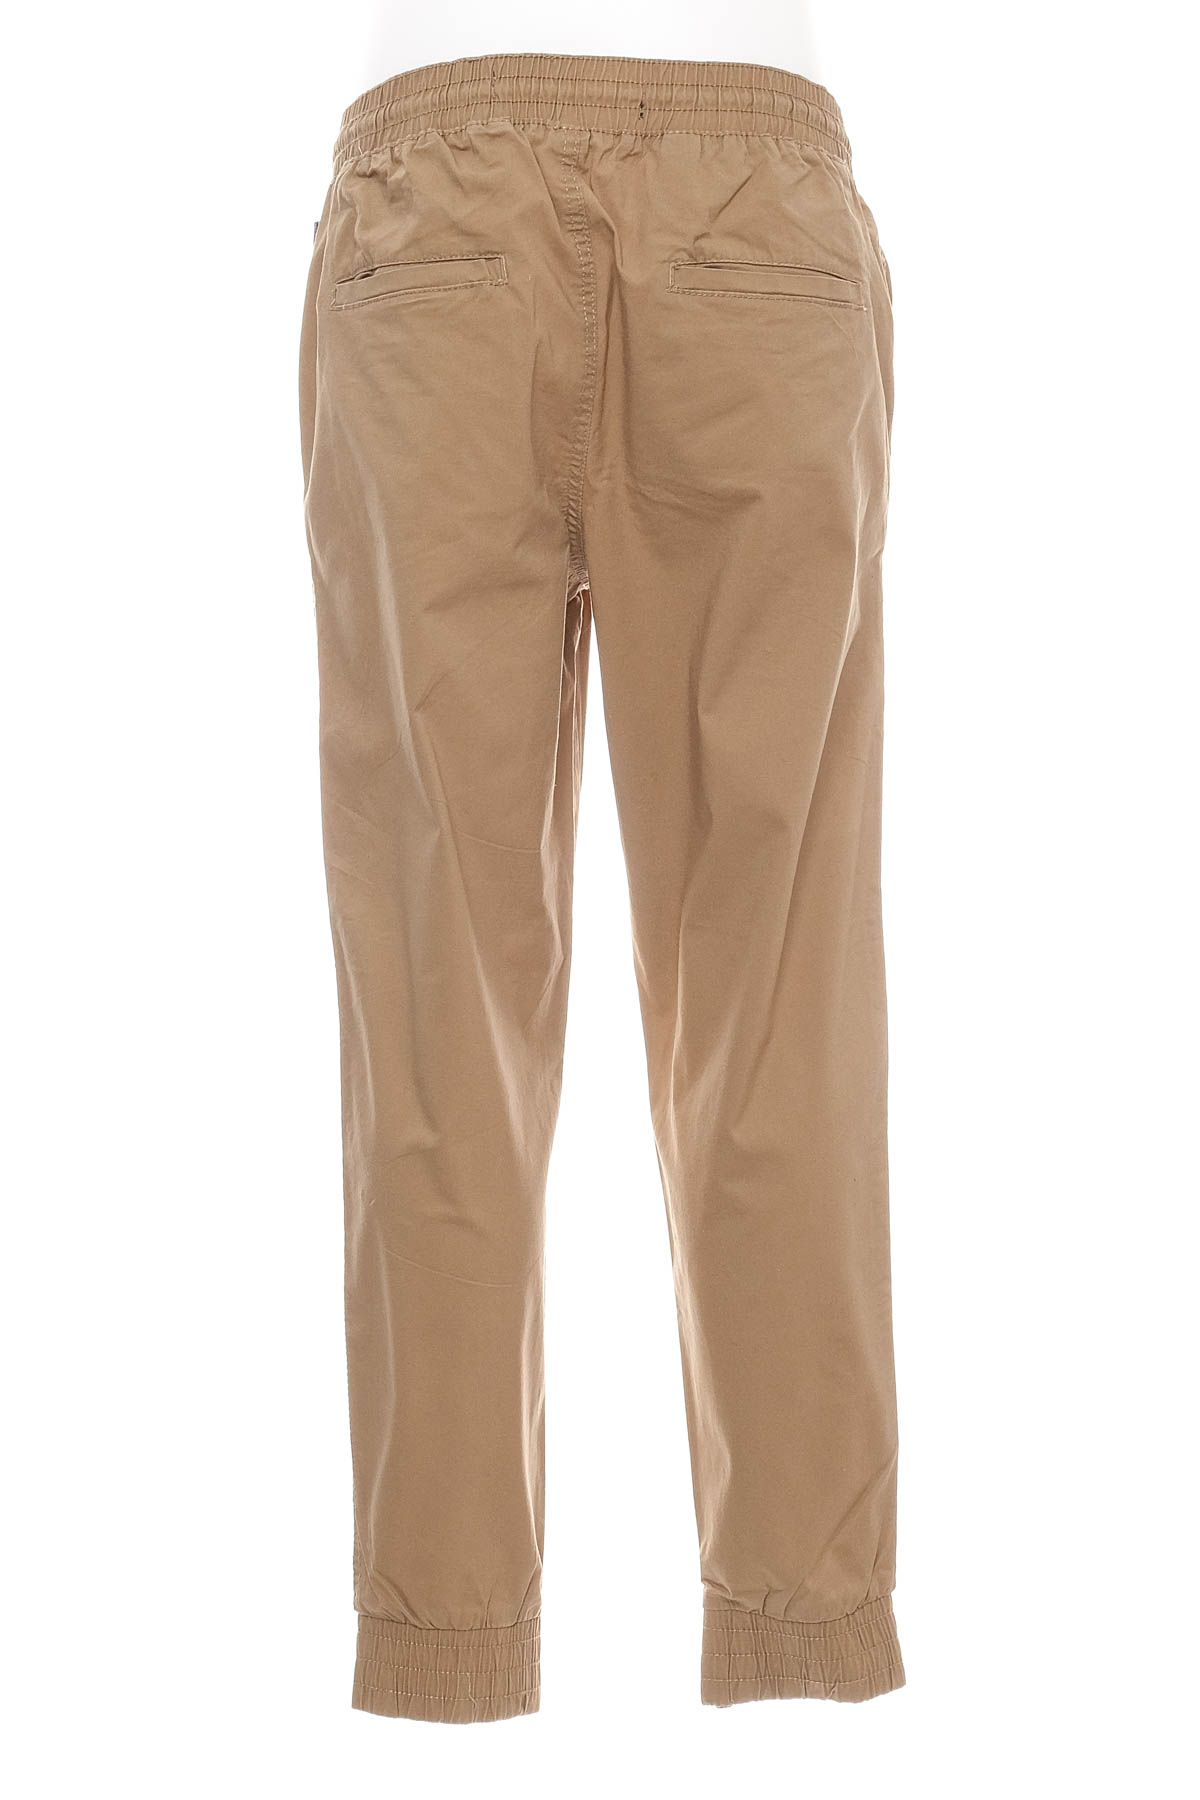 Men's trousers - Beverly Hills Polo Club - 1